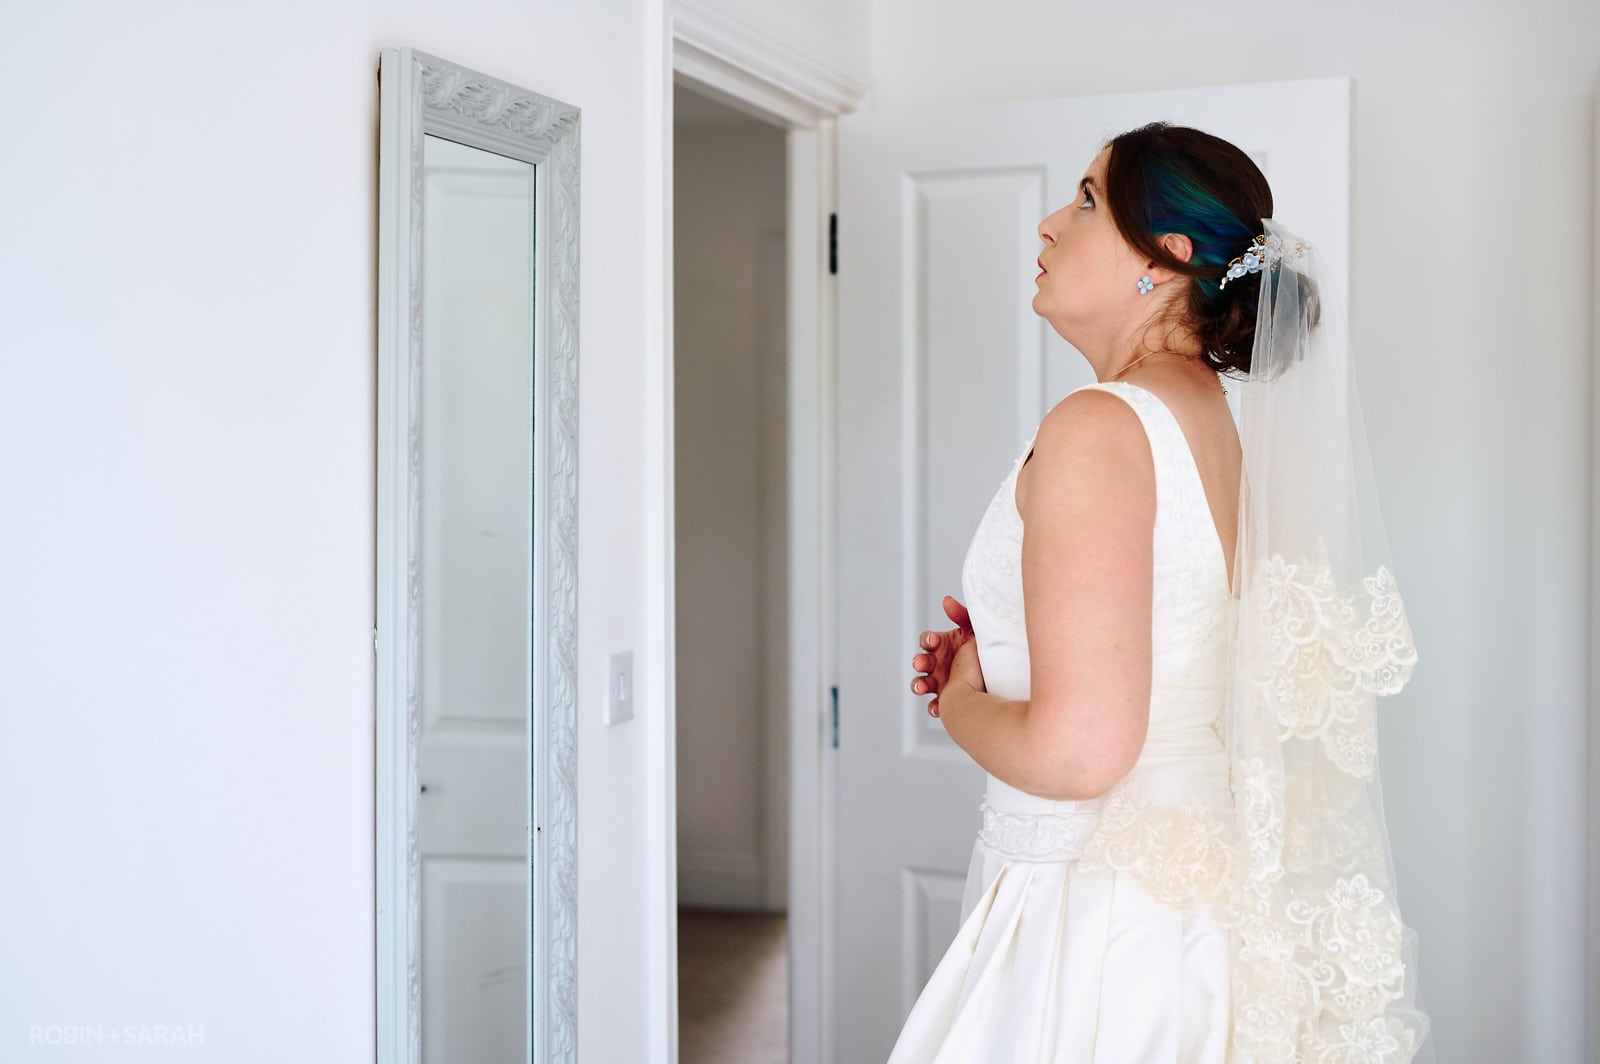 Bride takes a moment as she prepares for wedding day